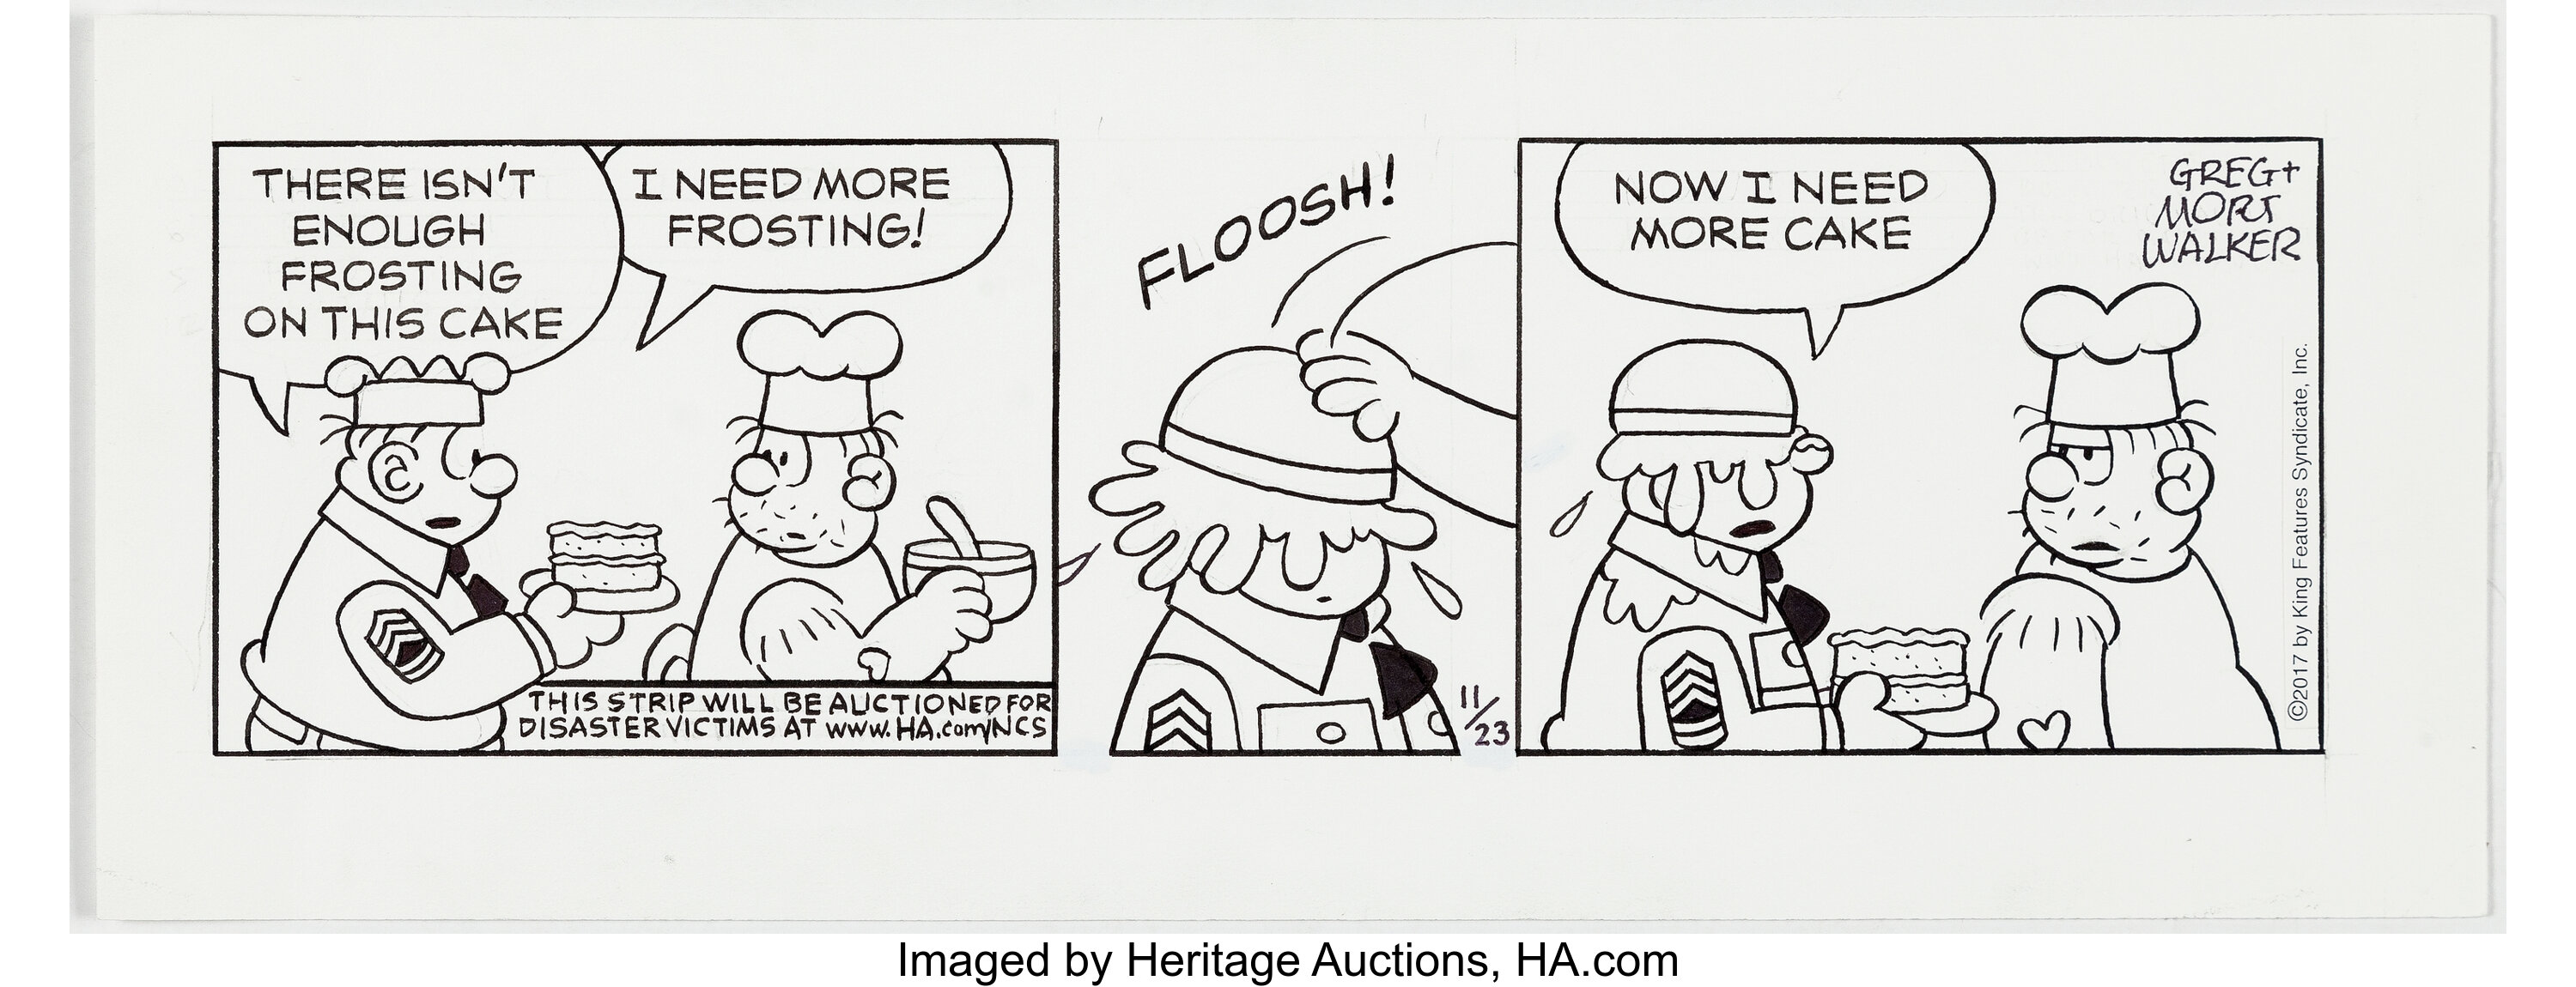 Greg And Mort Walker Beetle Bailey Daily Comic Strip Original Art Lot Heritage Auctions